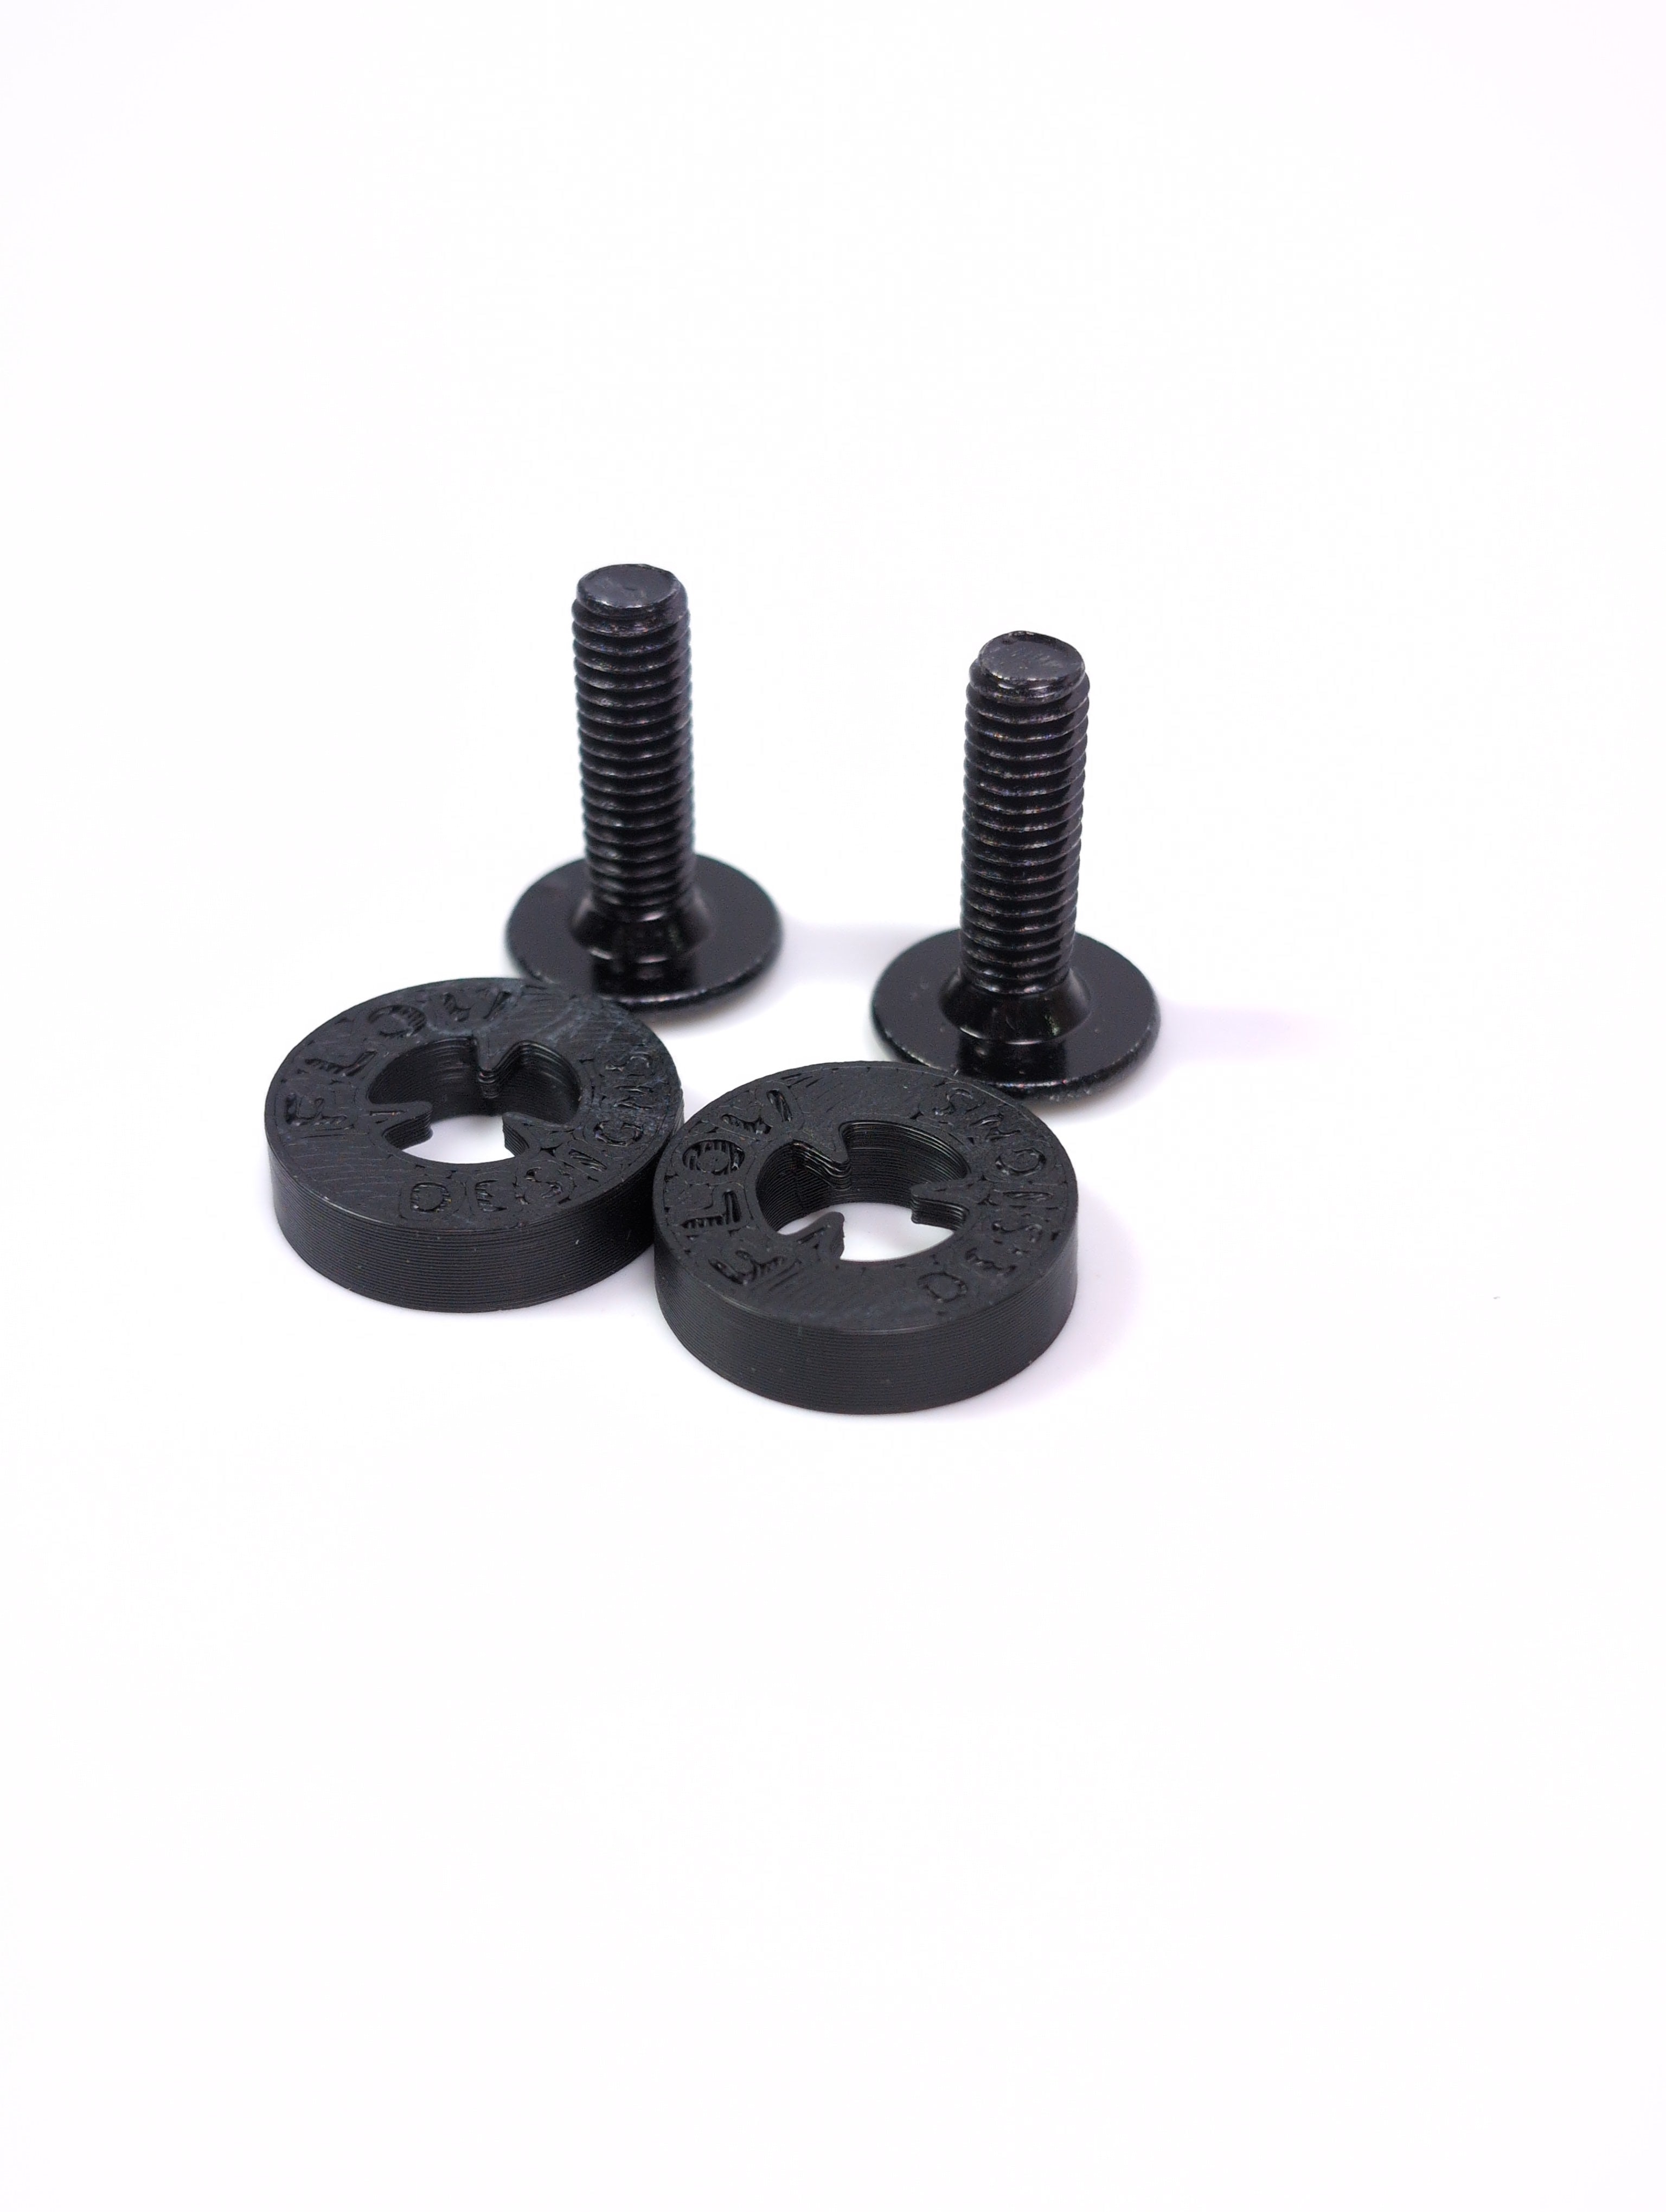 Stand off Spacer Kit